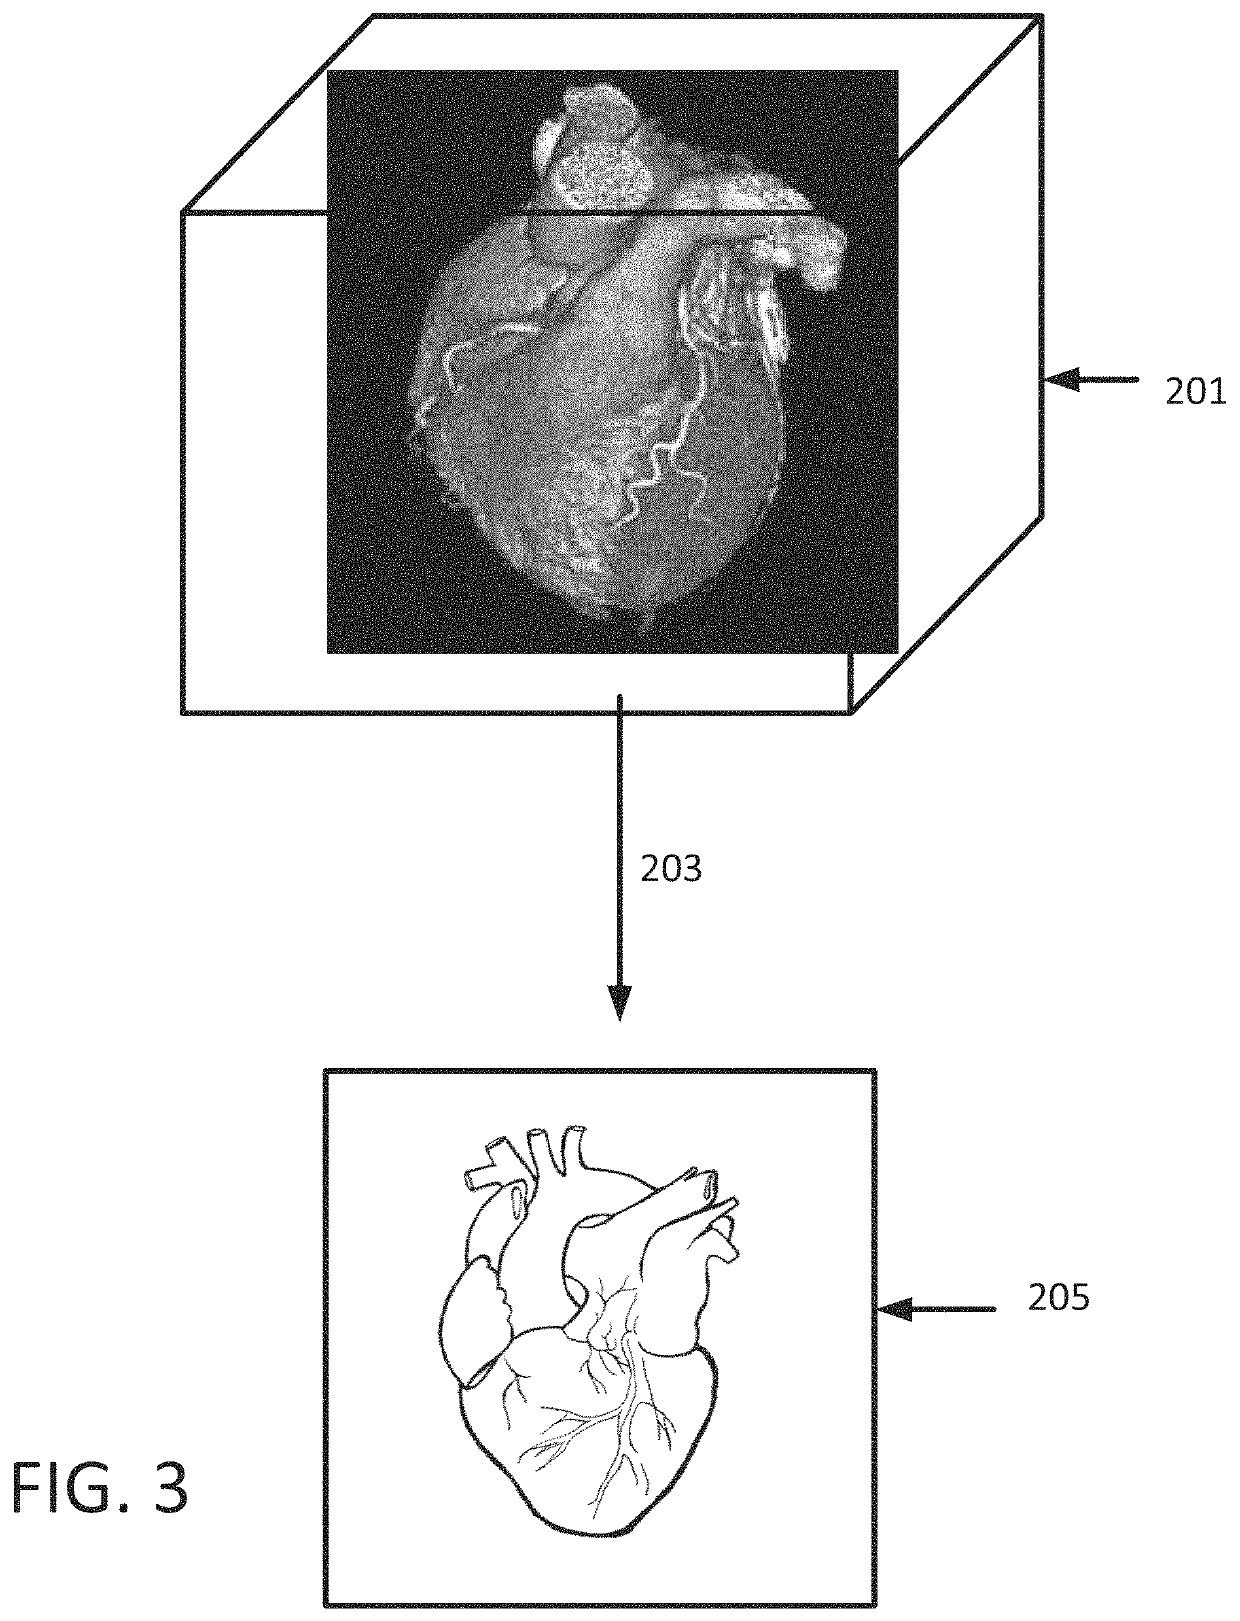 Method for memorable image generation for anonymized three-dimensional medical image workflows